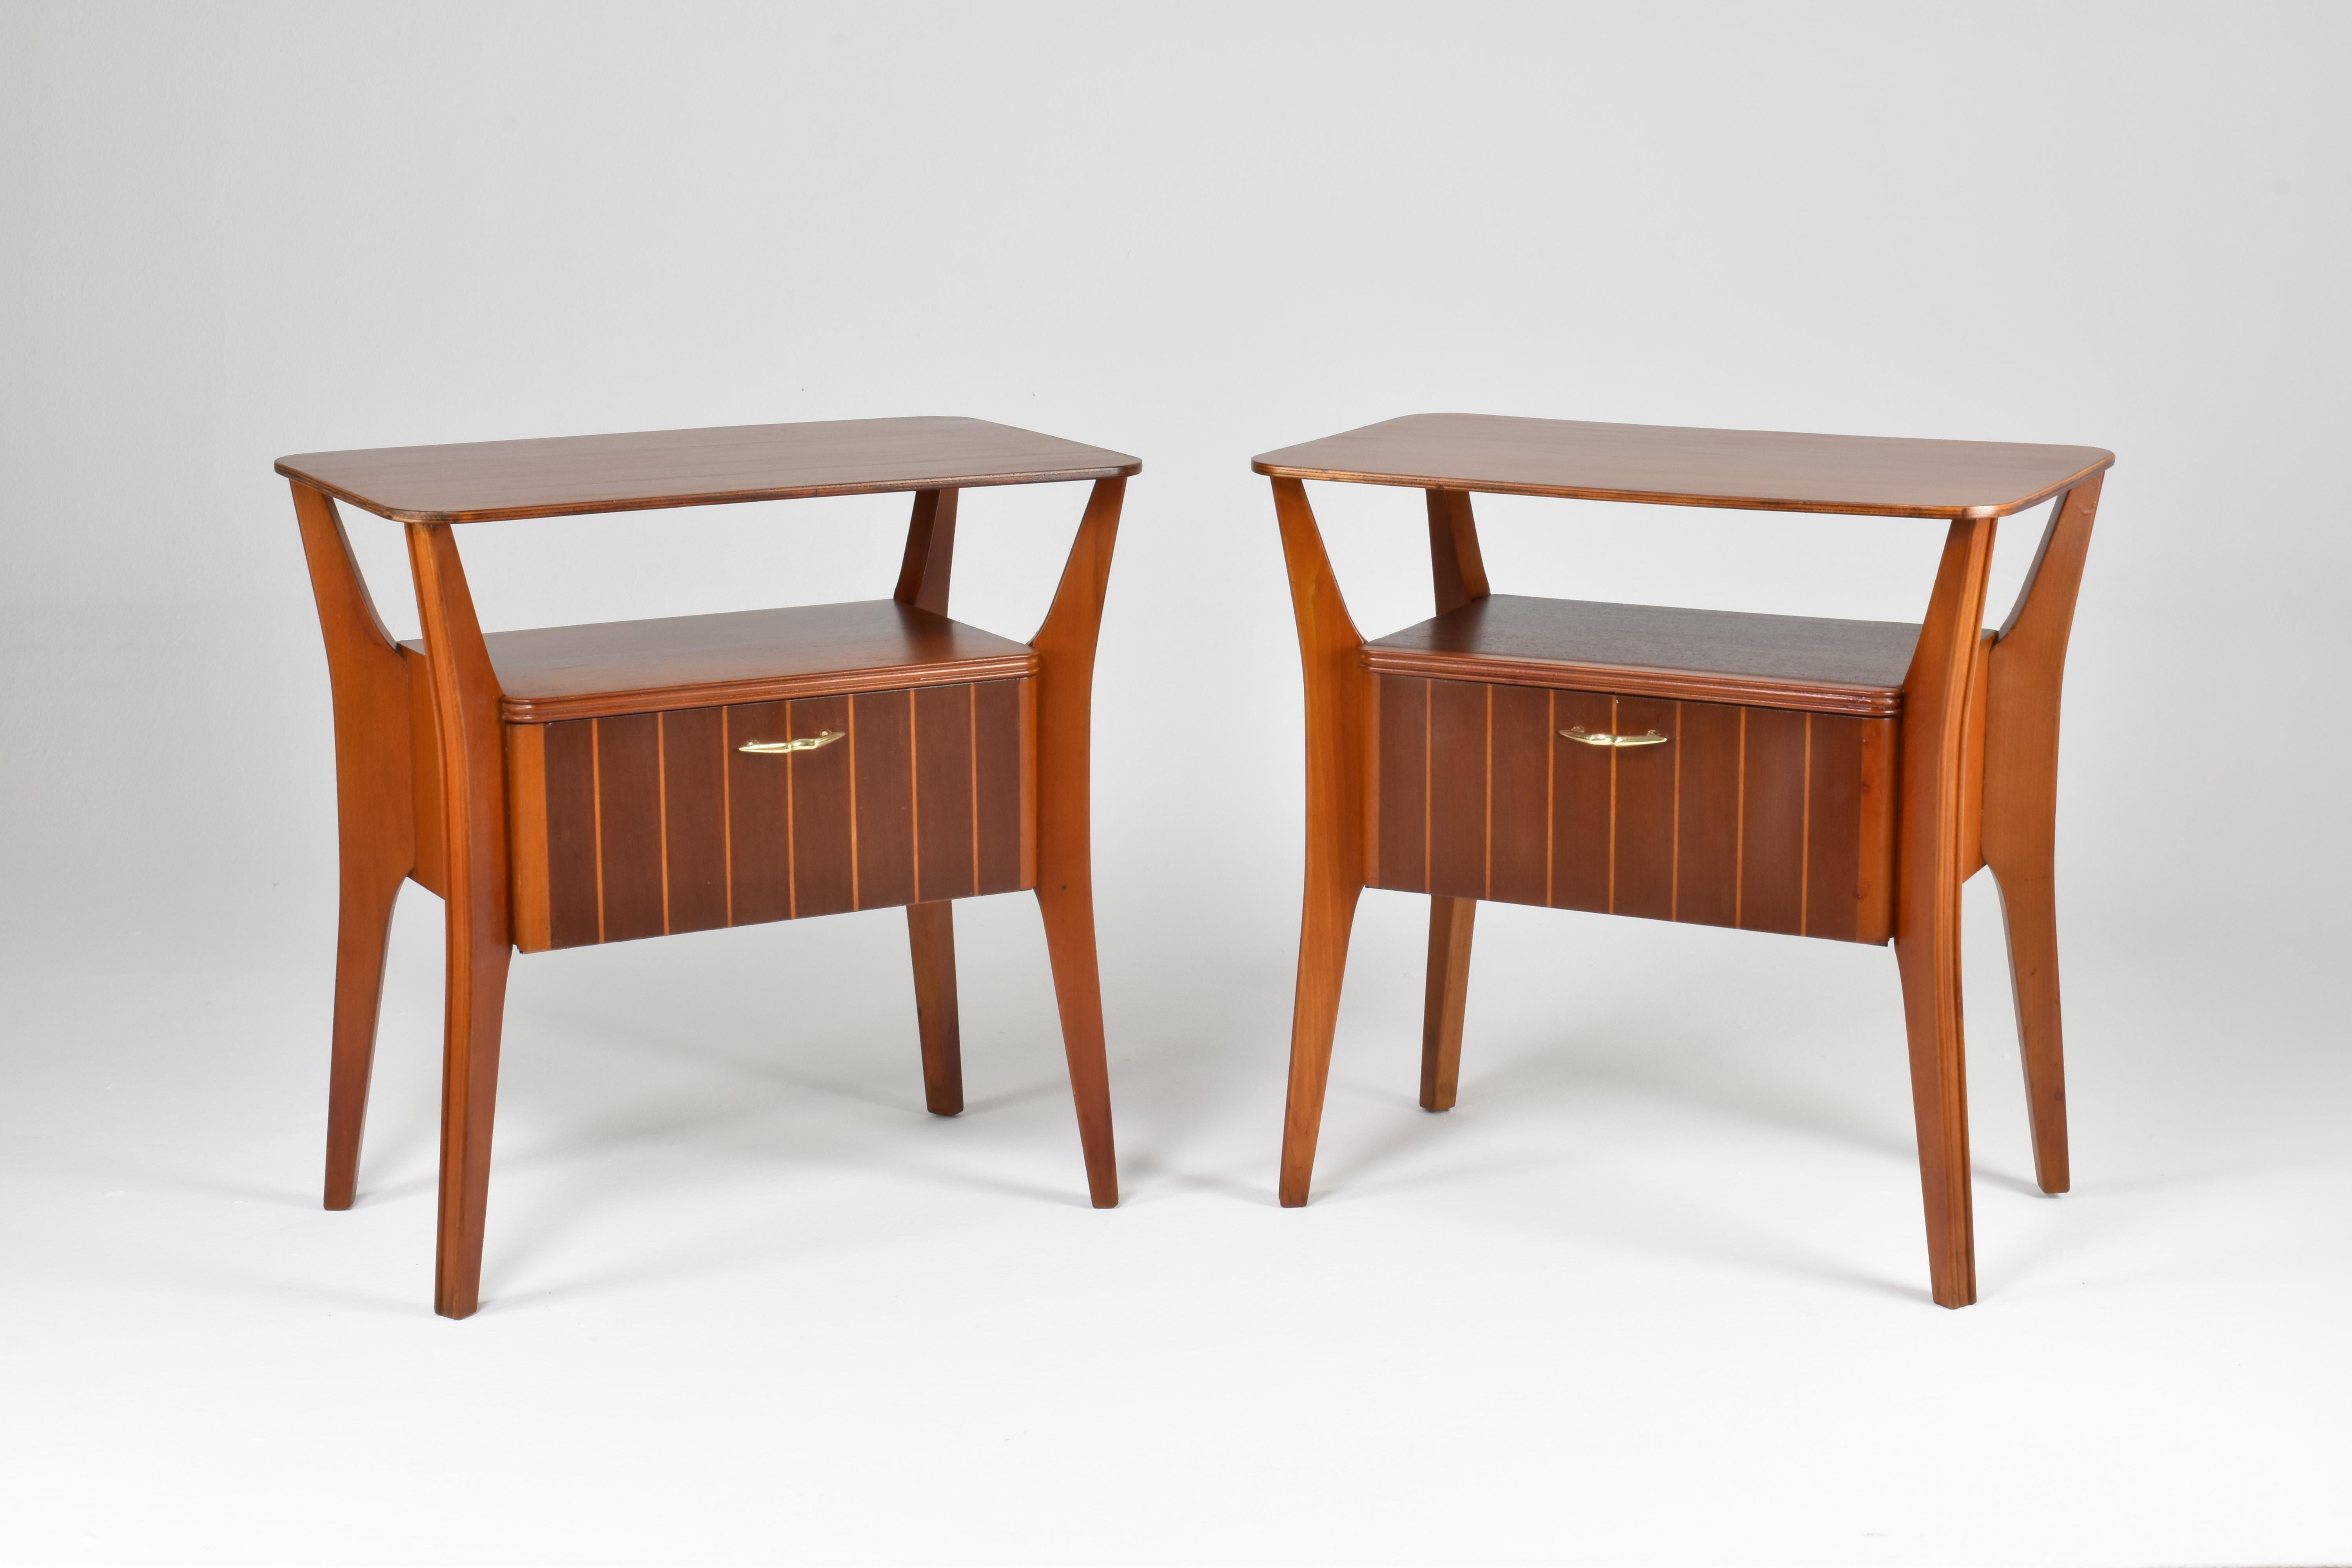 Striking set of two Italian maple wood nightstands attributed to Gio Ponti for Cantu from the 1950s in meticulously restored condition. These mid-century tables are highlighted by their sophisticated geometrically shaped tabletops and an intricate